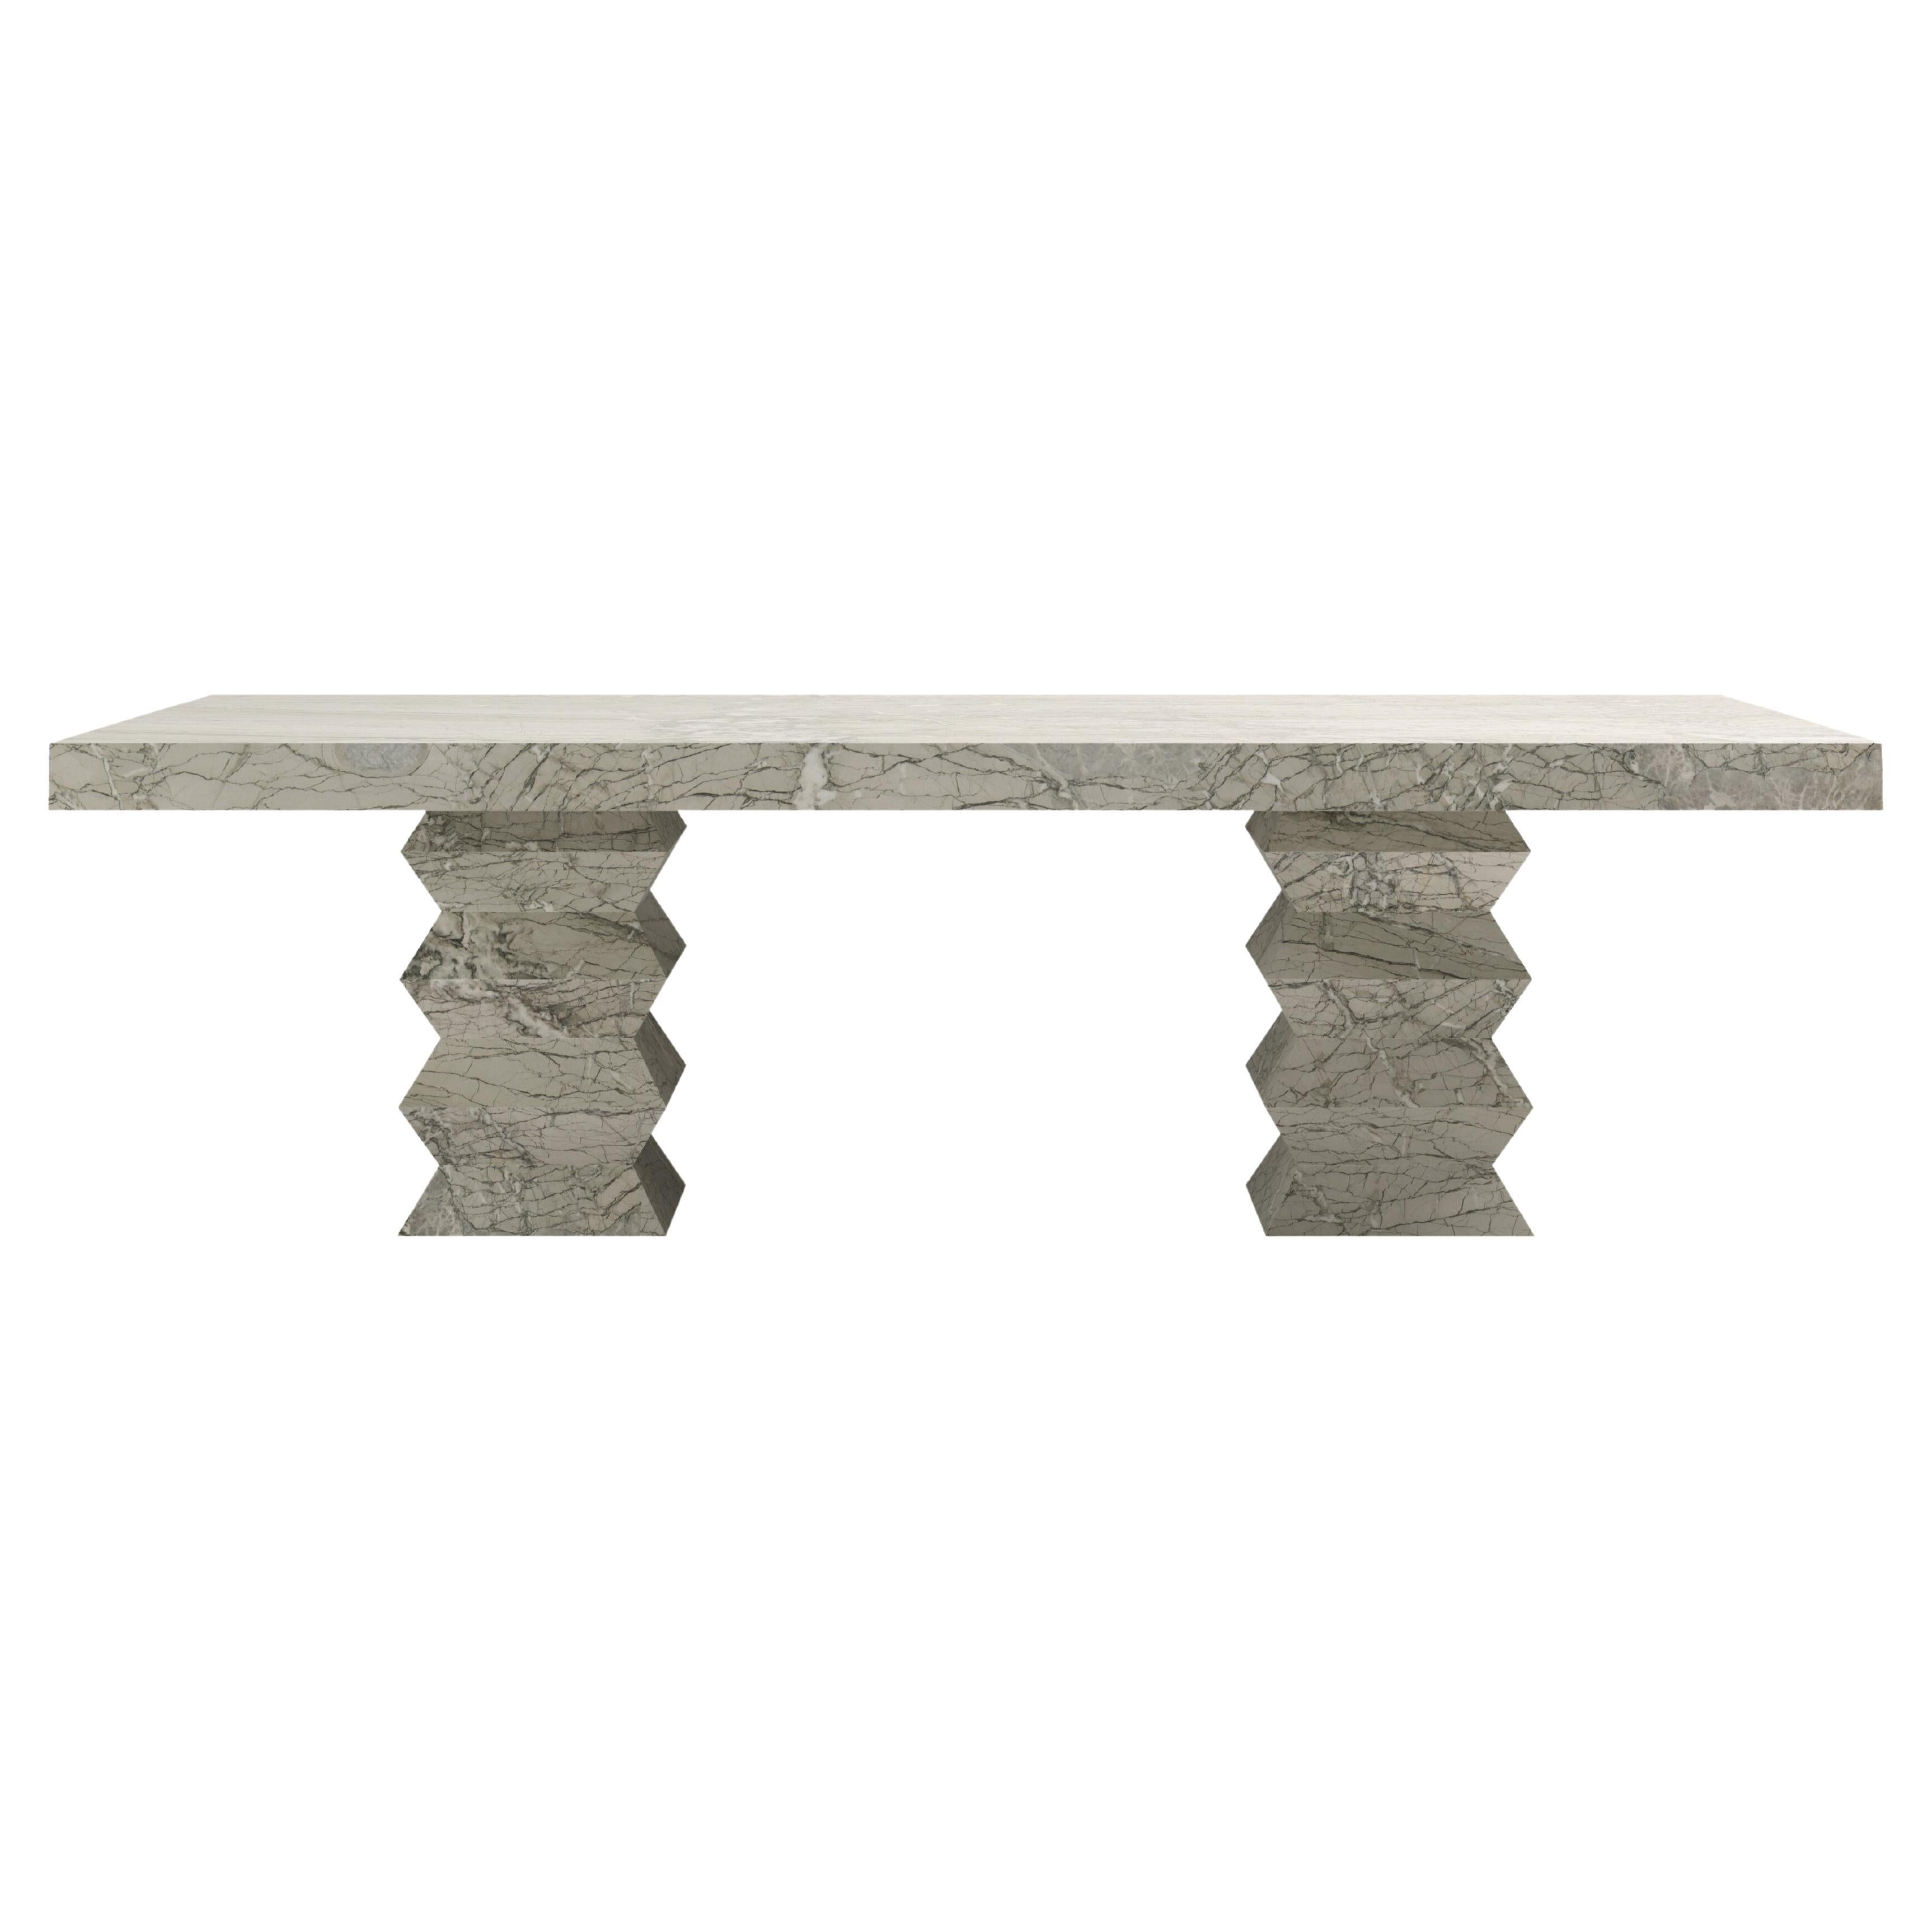 FORM(LA) Grinza Rectangle Dining Table 118"L x 48"W x 32"H Verde Antigua Marble For Sale